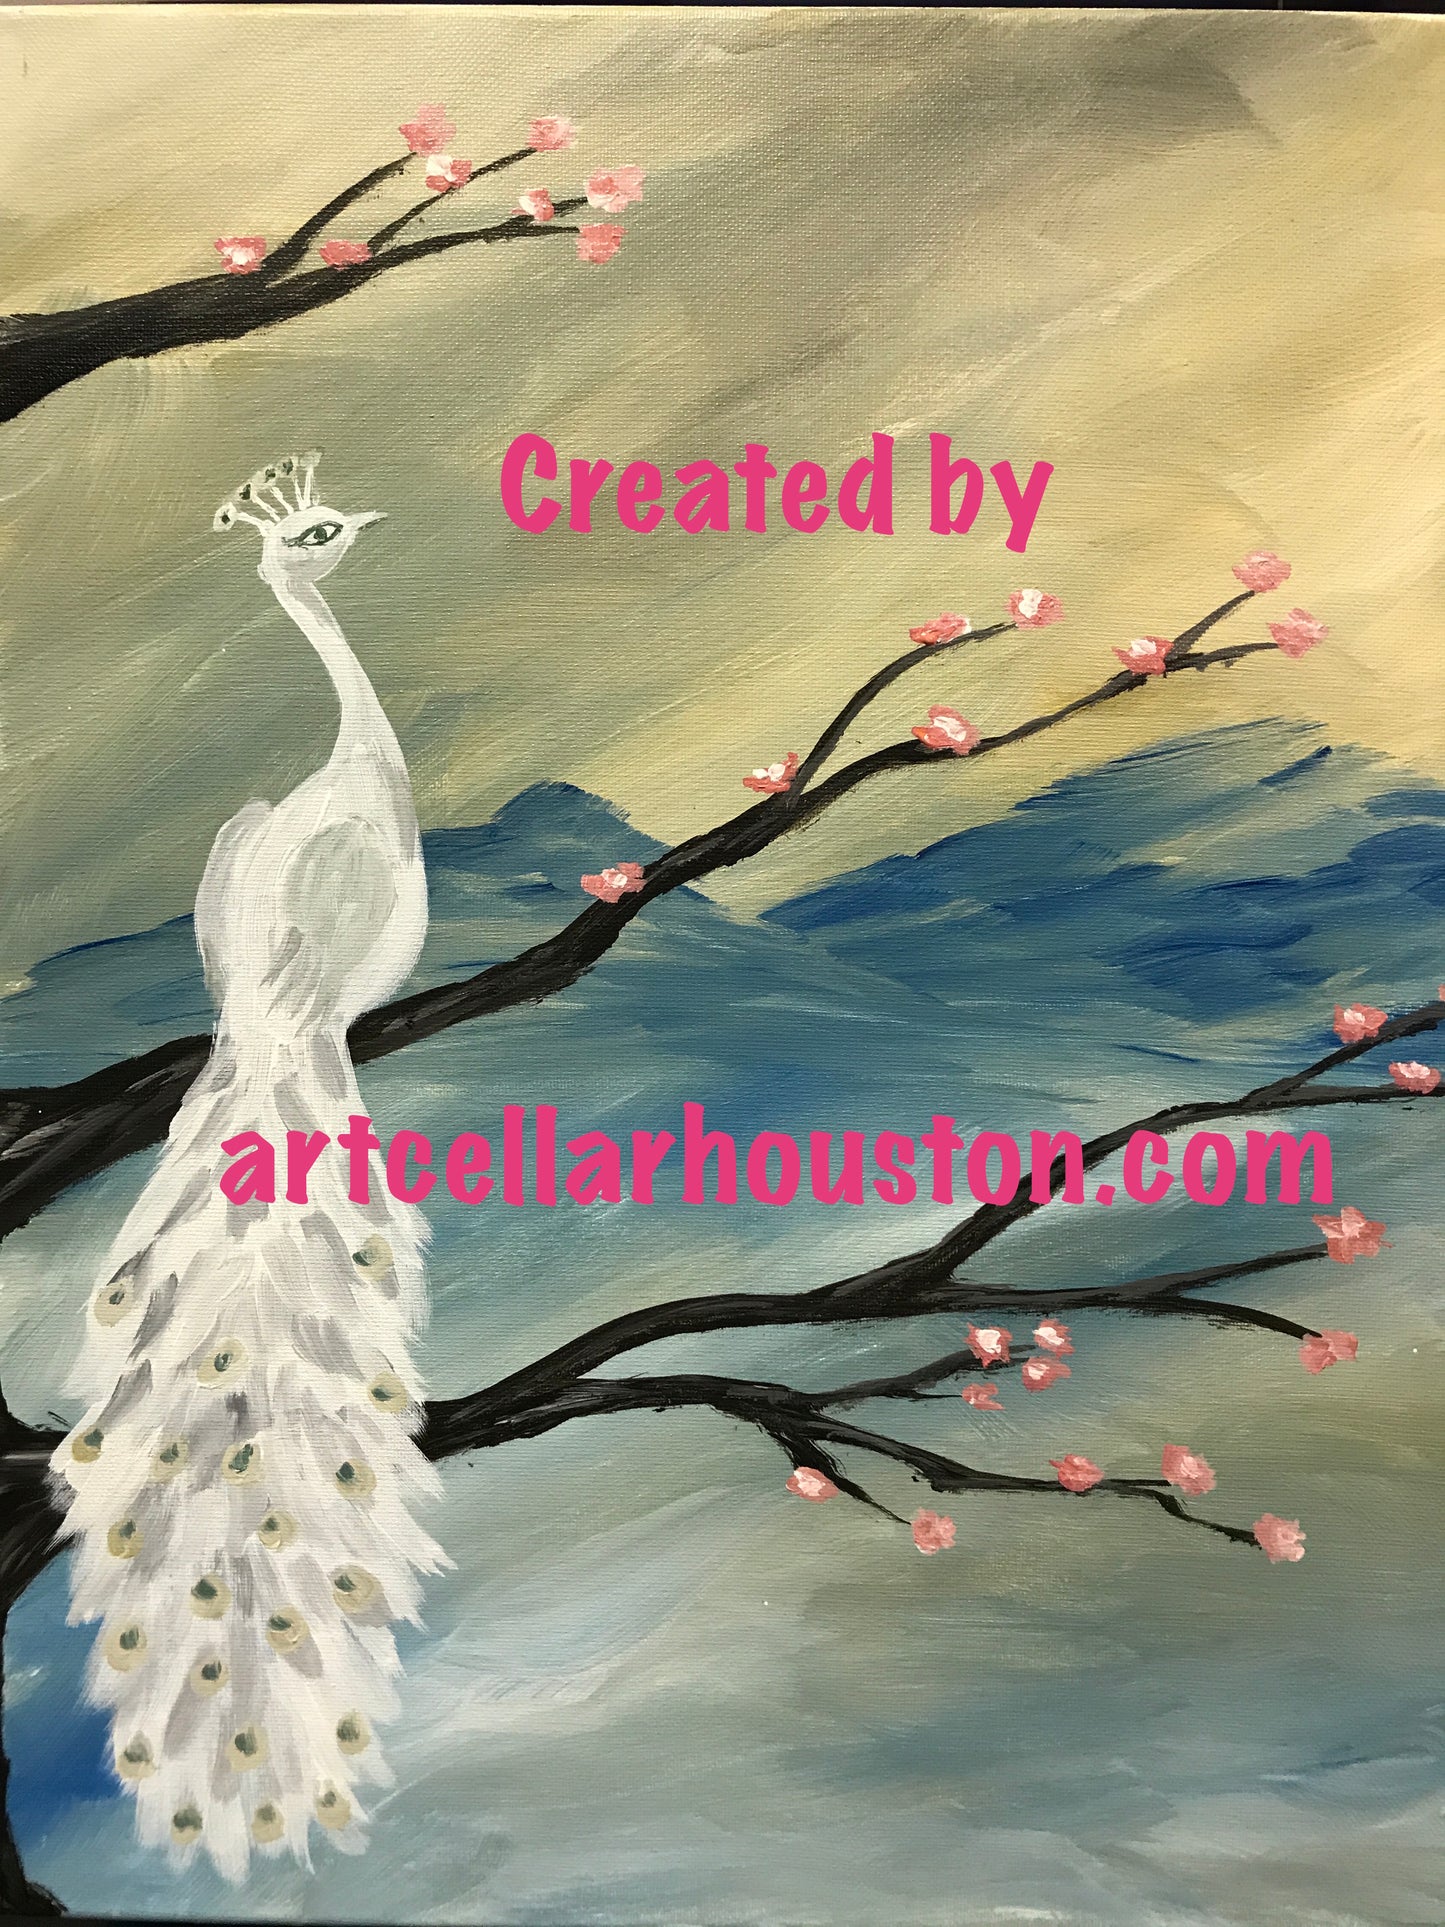 Sat, May 18, 10a-12p “Peacock Sunset” Public Houston Kids Painting Class